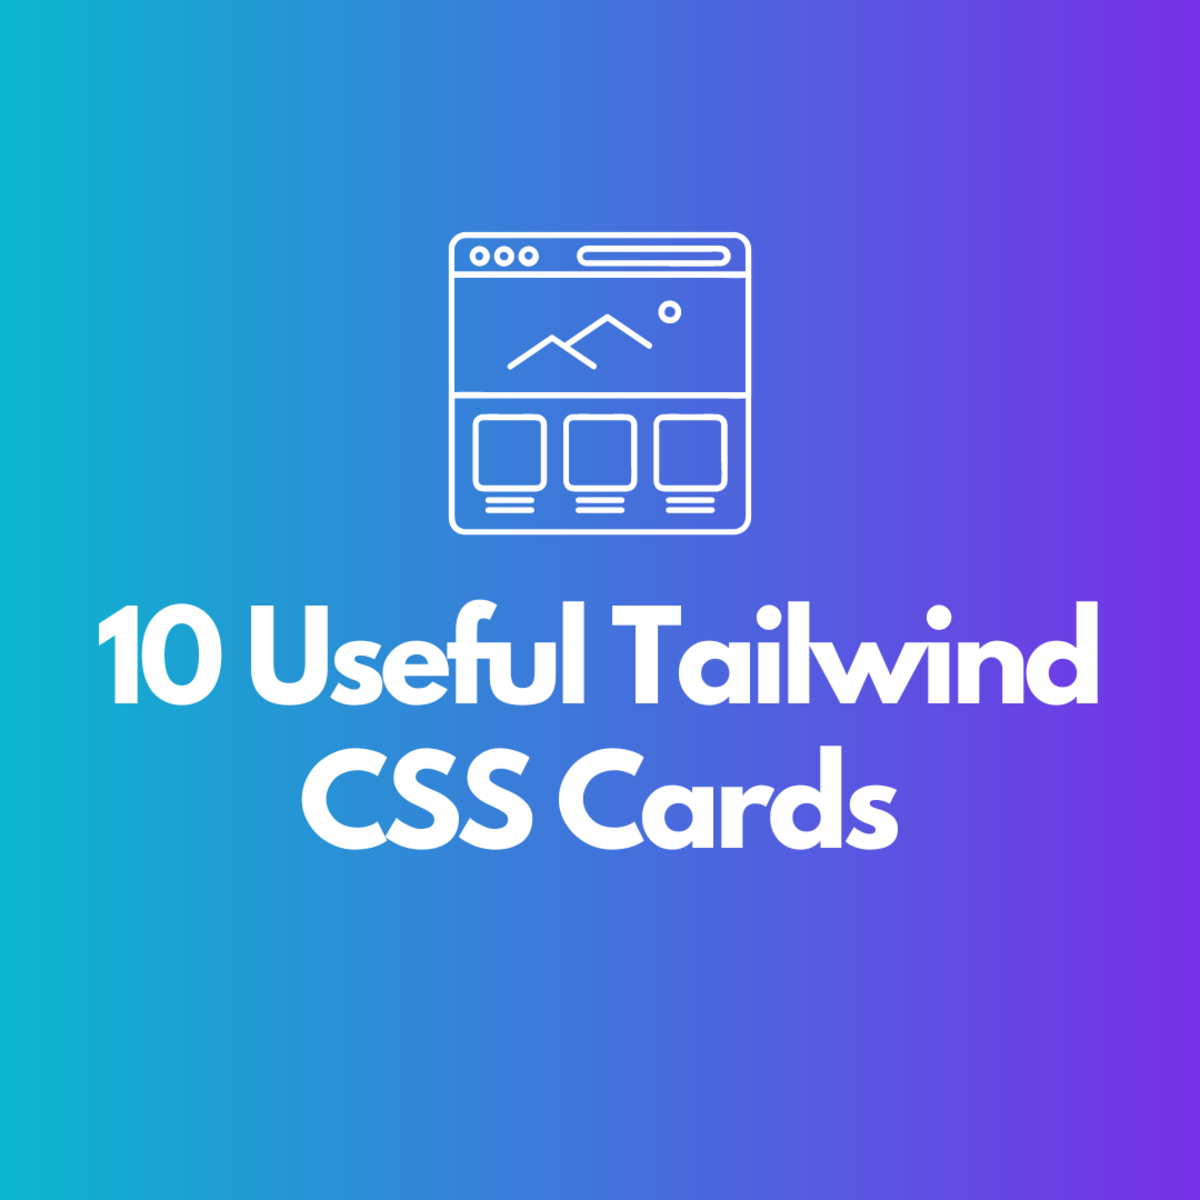 10 Useful Tailwind CSS Card Examples to Check Out: The Ultimate List